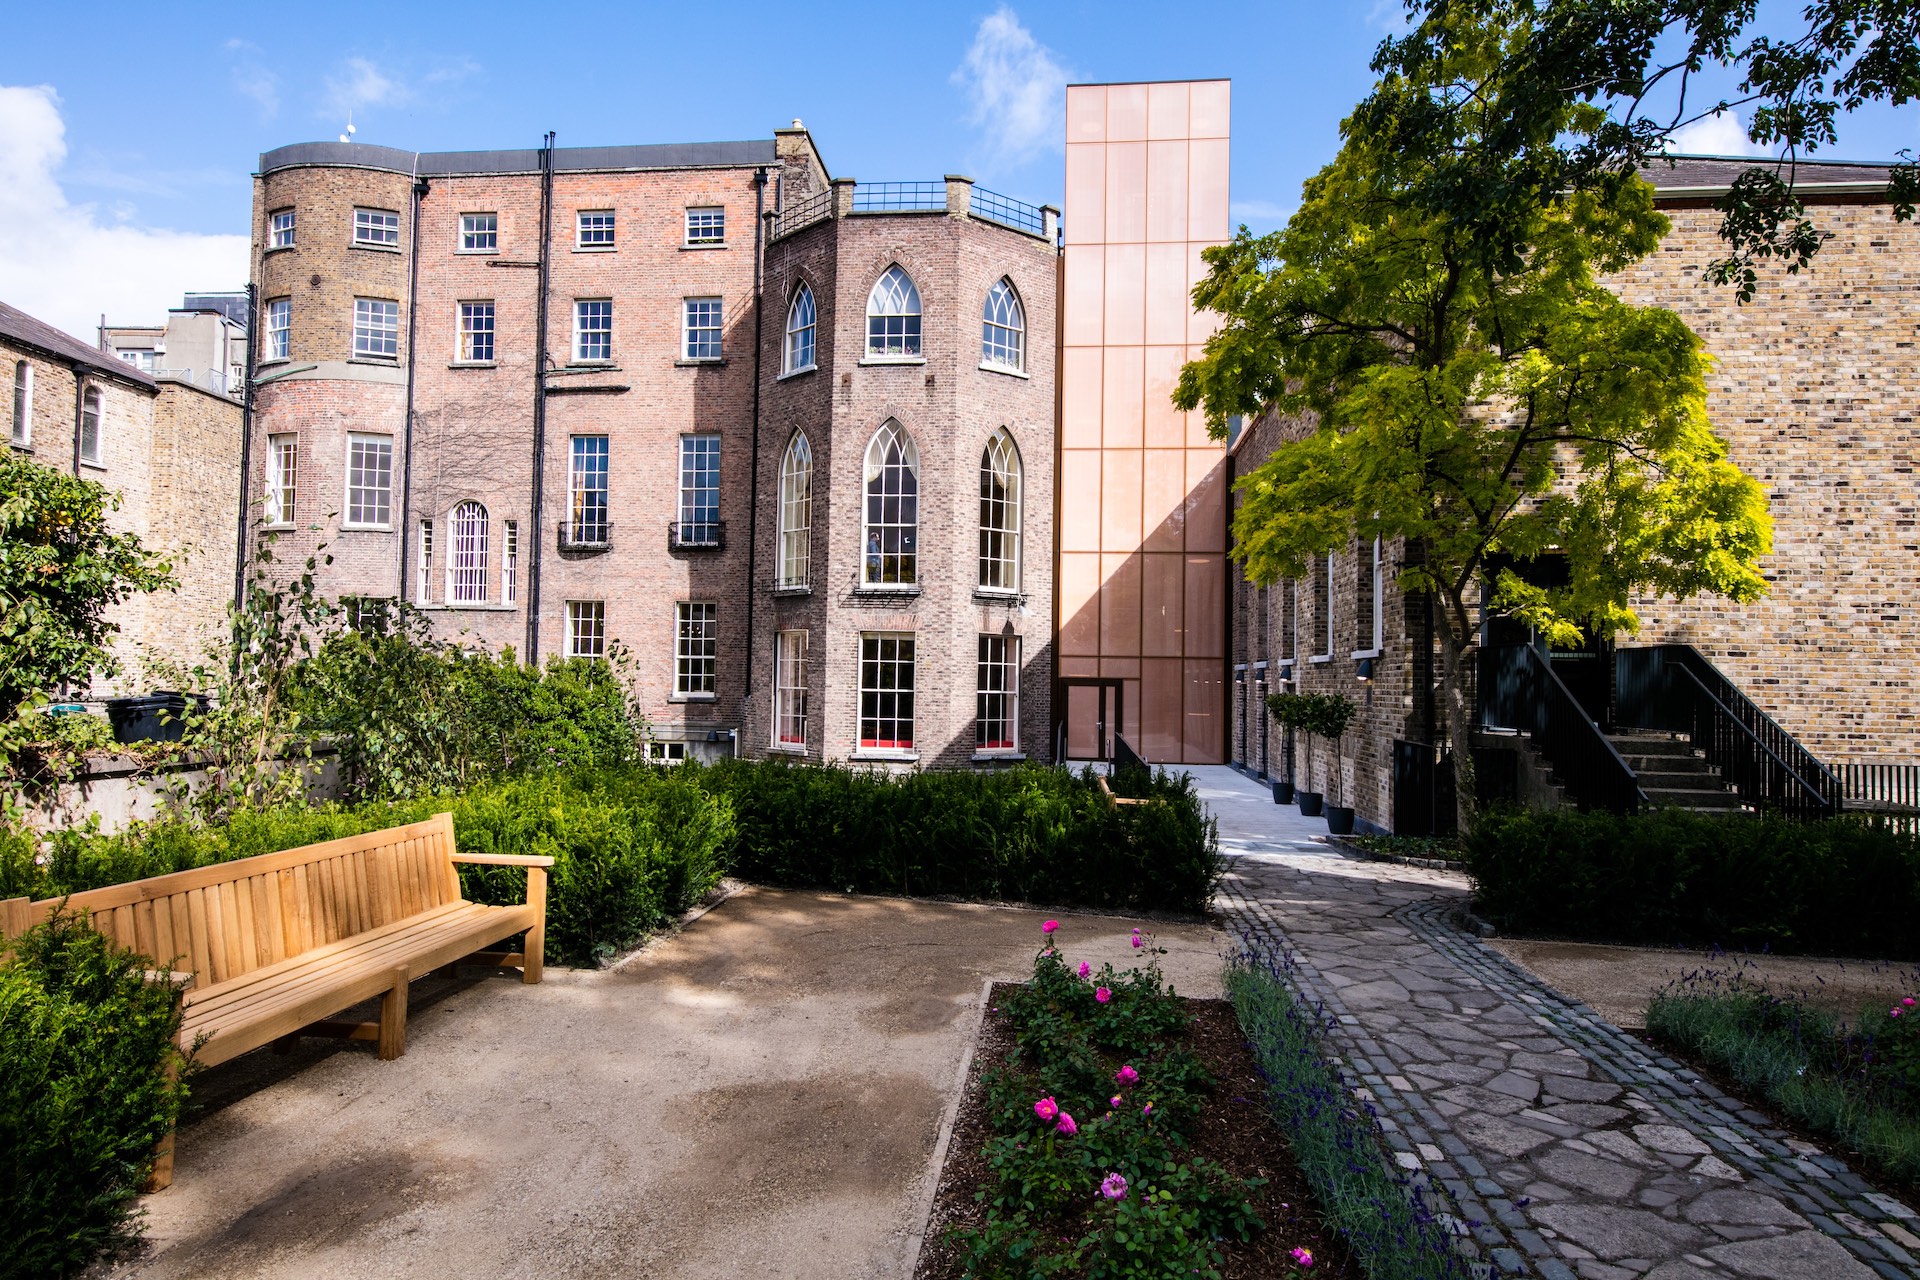 A view from the MoLI Reader Garden showing the two grey brick Georgian buildings, the copper exterior of the lift addition and the grey brick Aula Maxima.